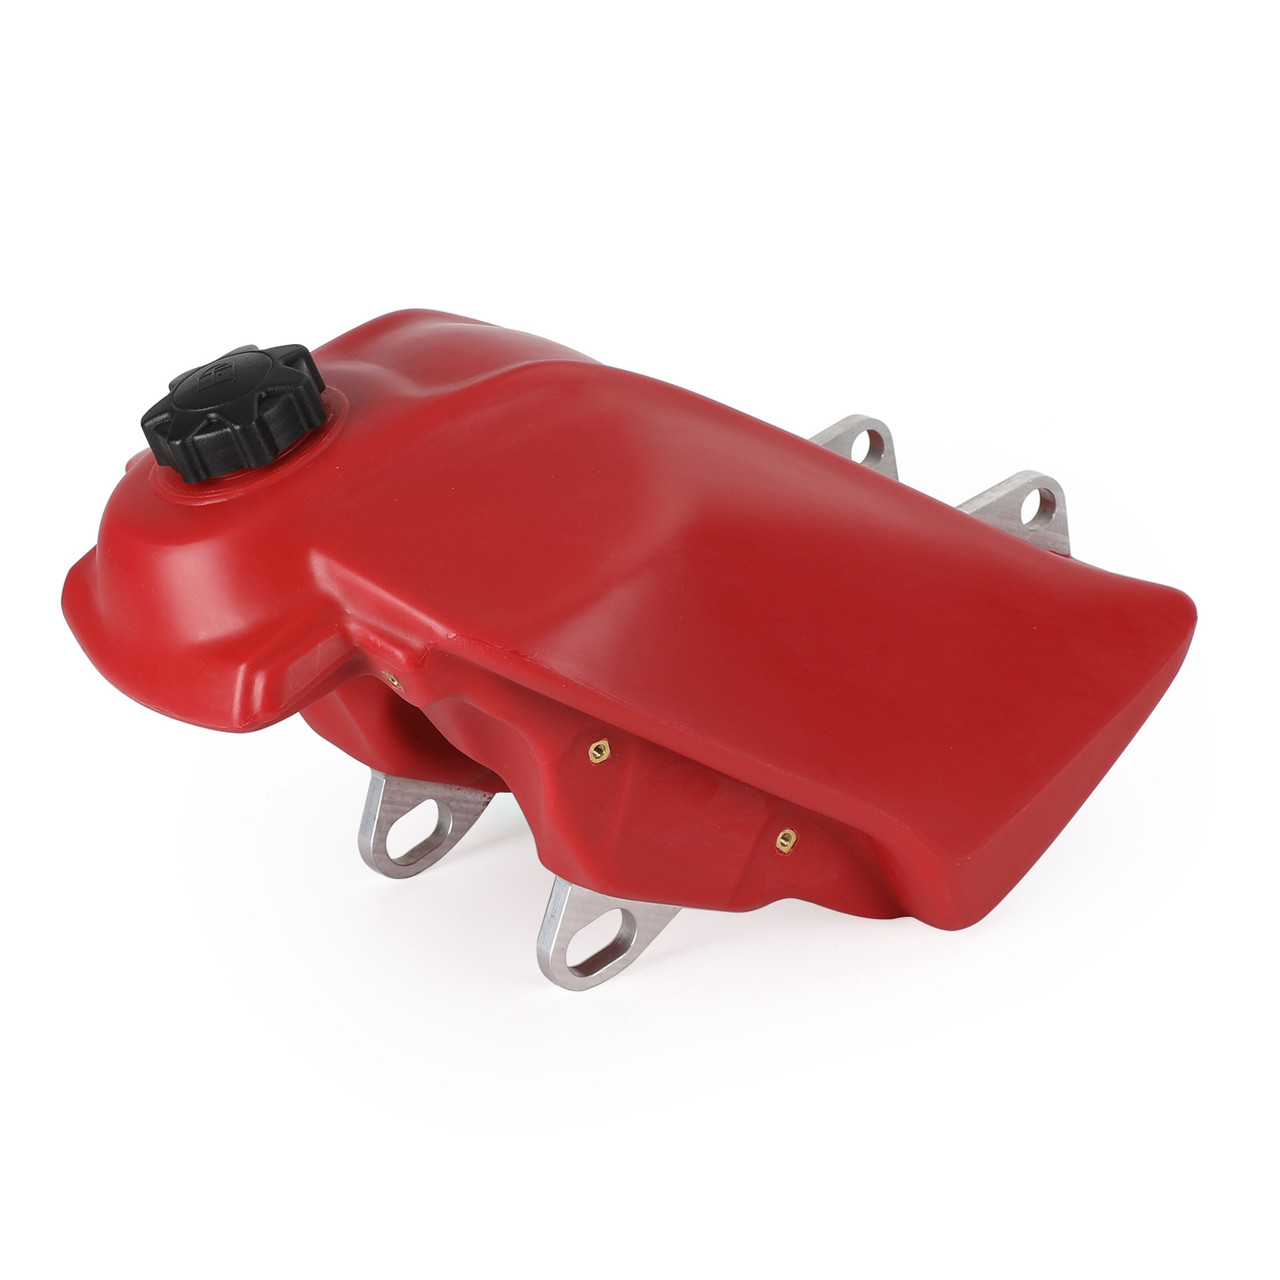 Replacement Plastic Fuel GAS Tank Fit for Honda ATC250R 3-WHEELER 1985-1986 Red